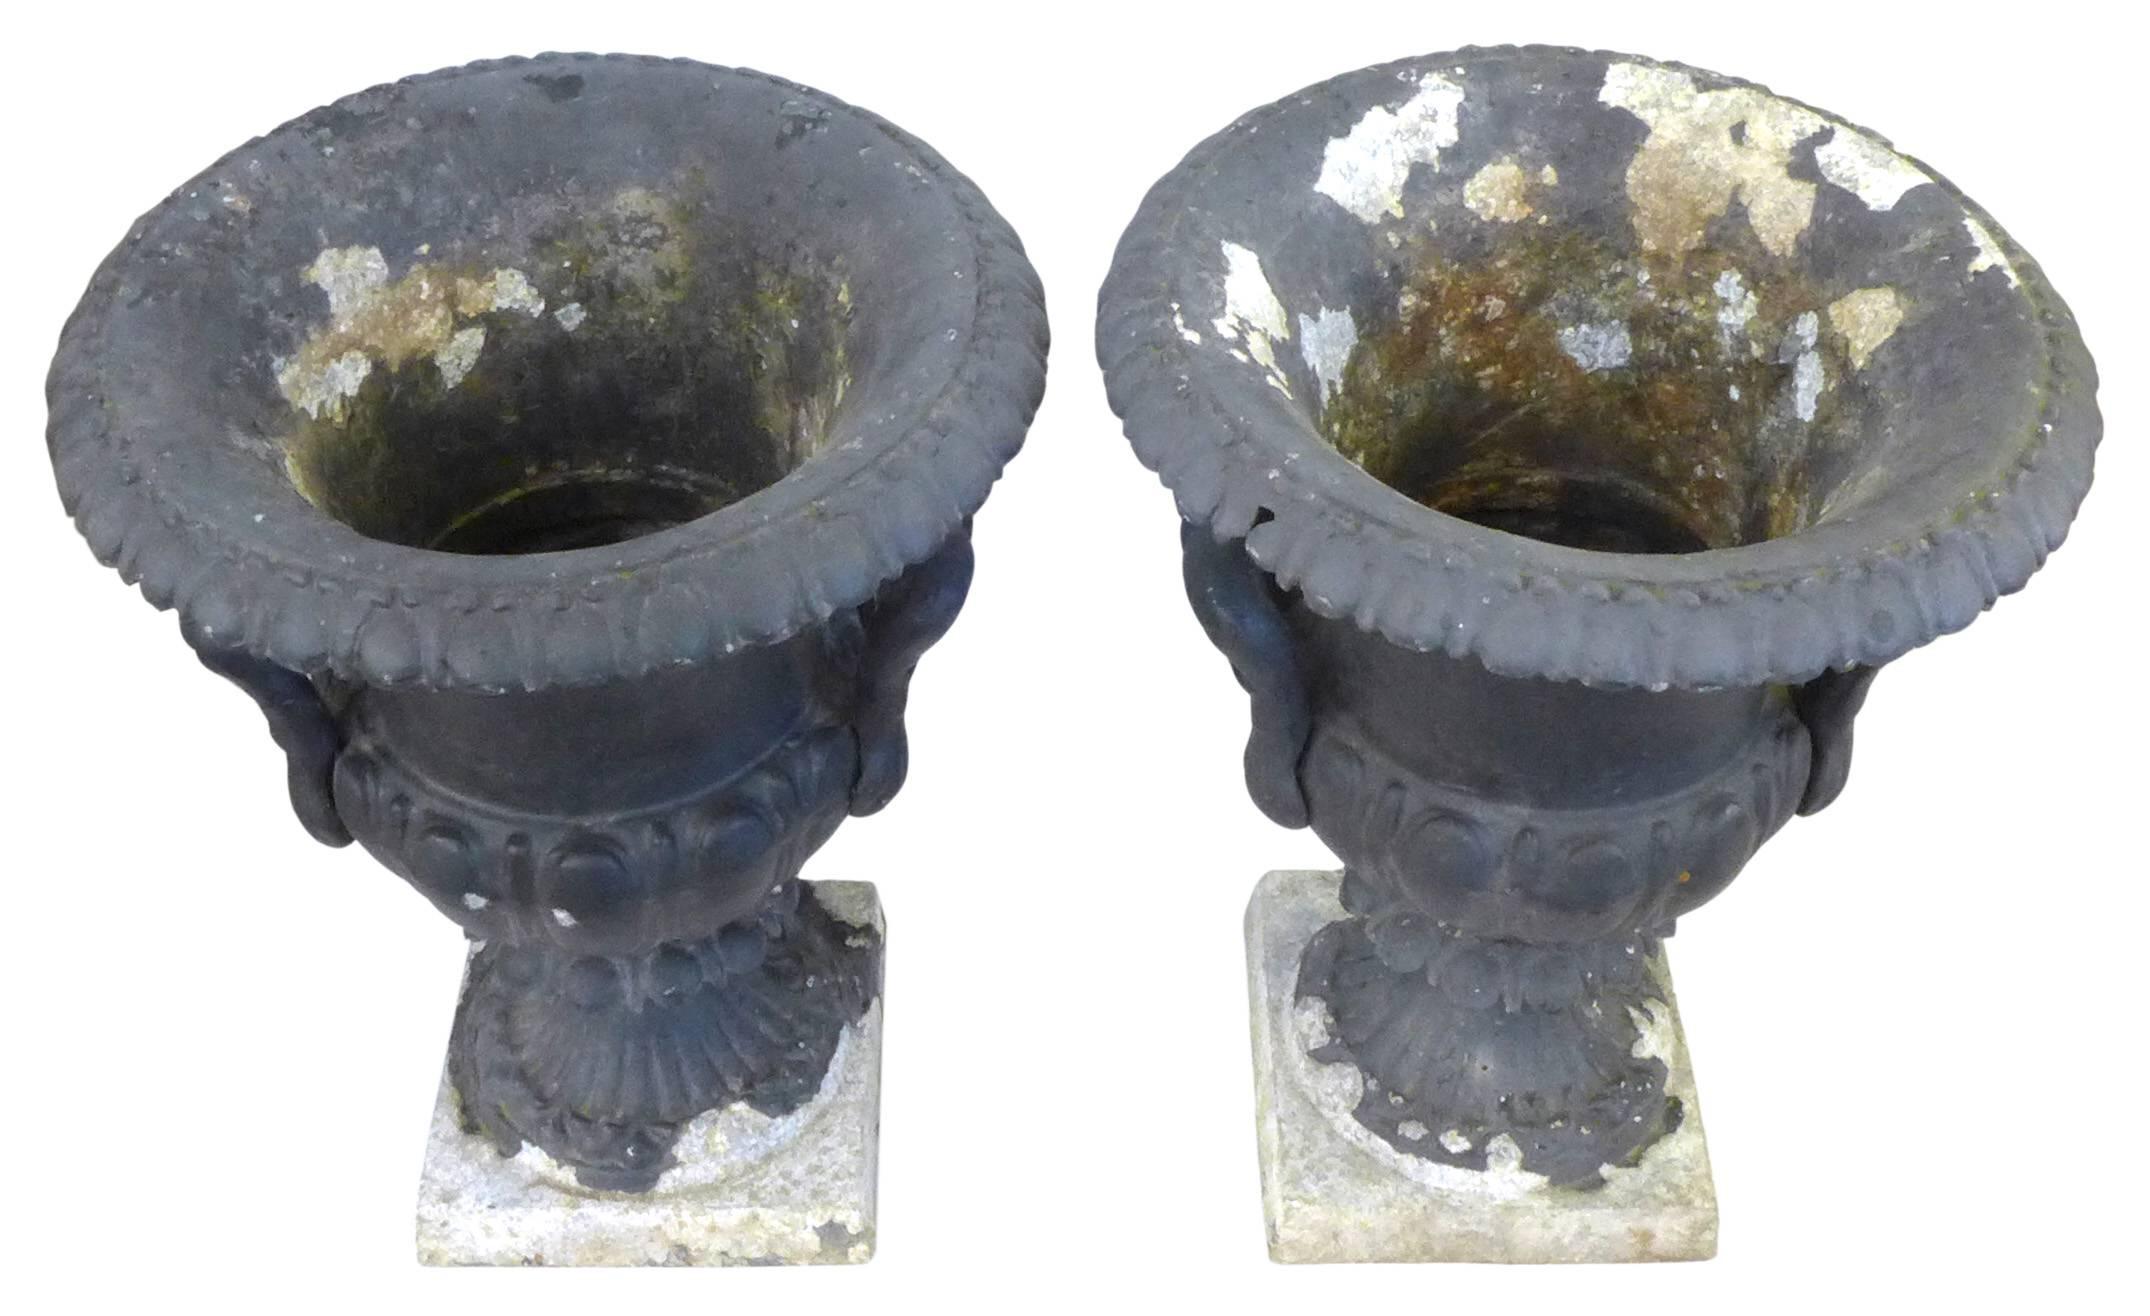 A stunning pair of neoclassical, decorative urns in zinc-clad cast-metal. Wearing a beautiful patina, mottled and oxidized from years of life outdoors; a 1940s American homage to 19th century European garden ornaments. Elegant and timeless, great